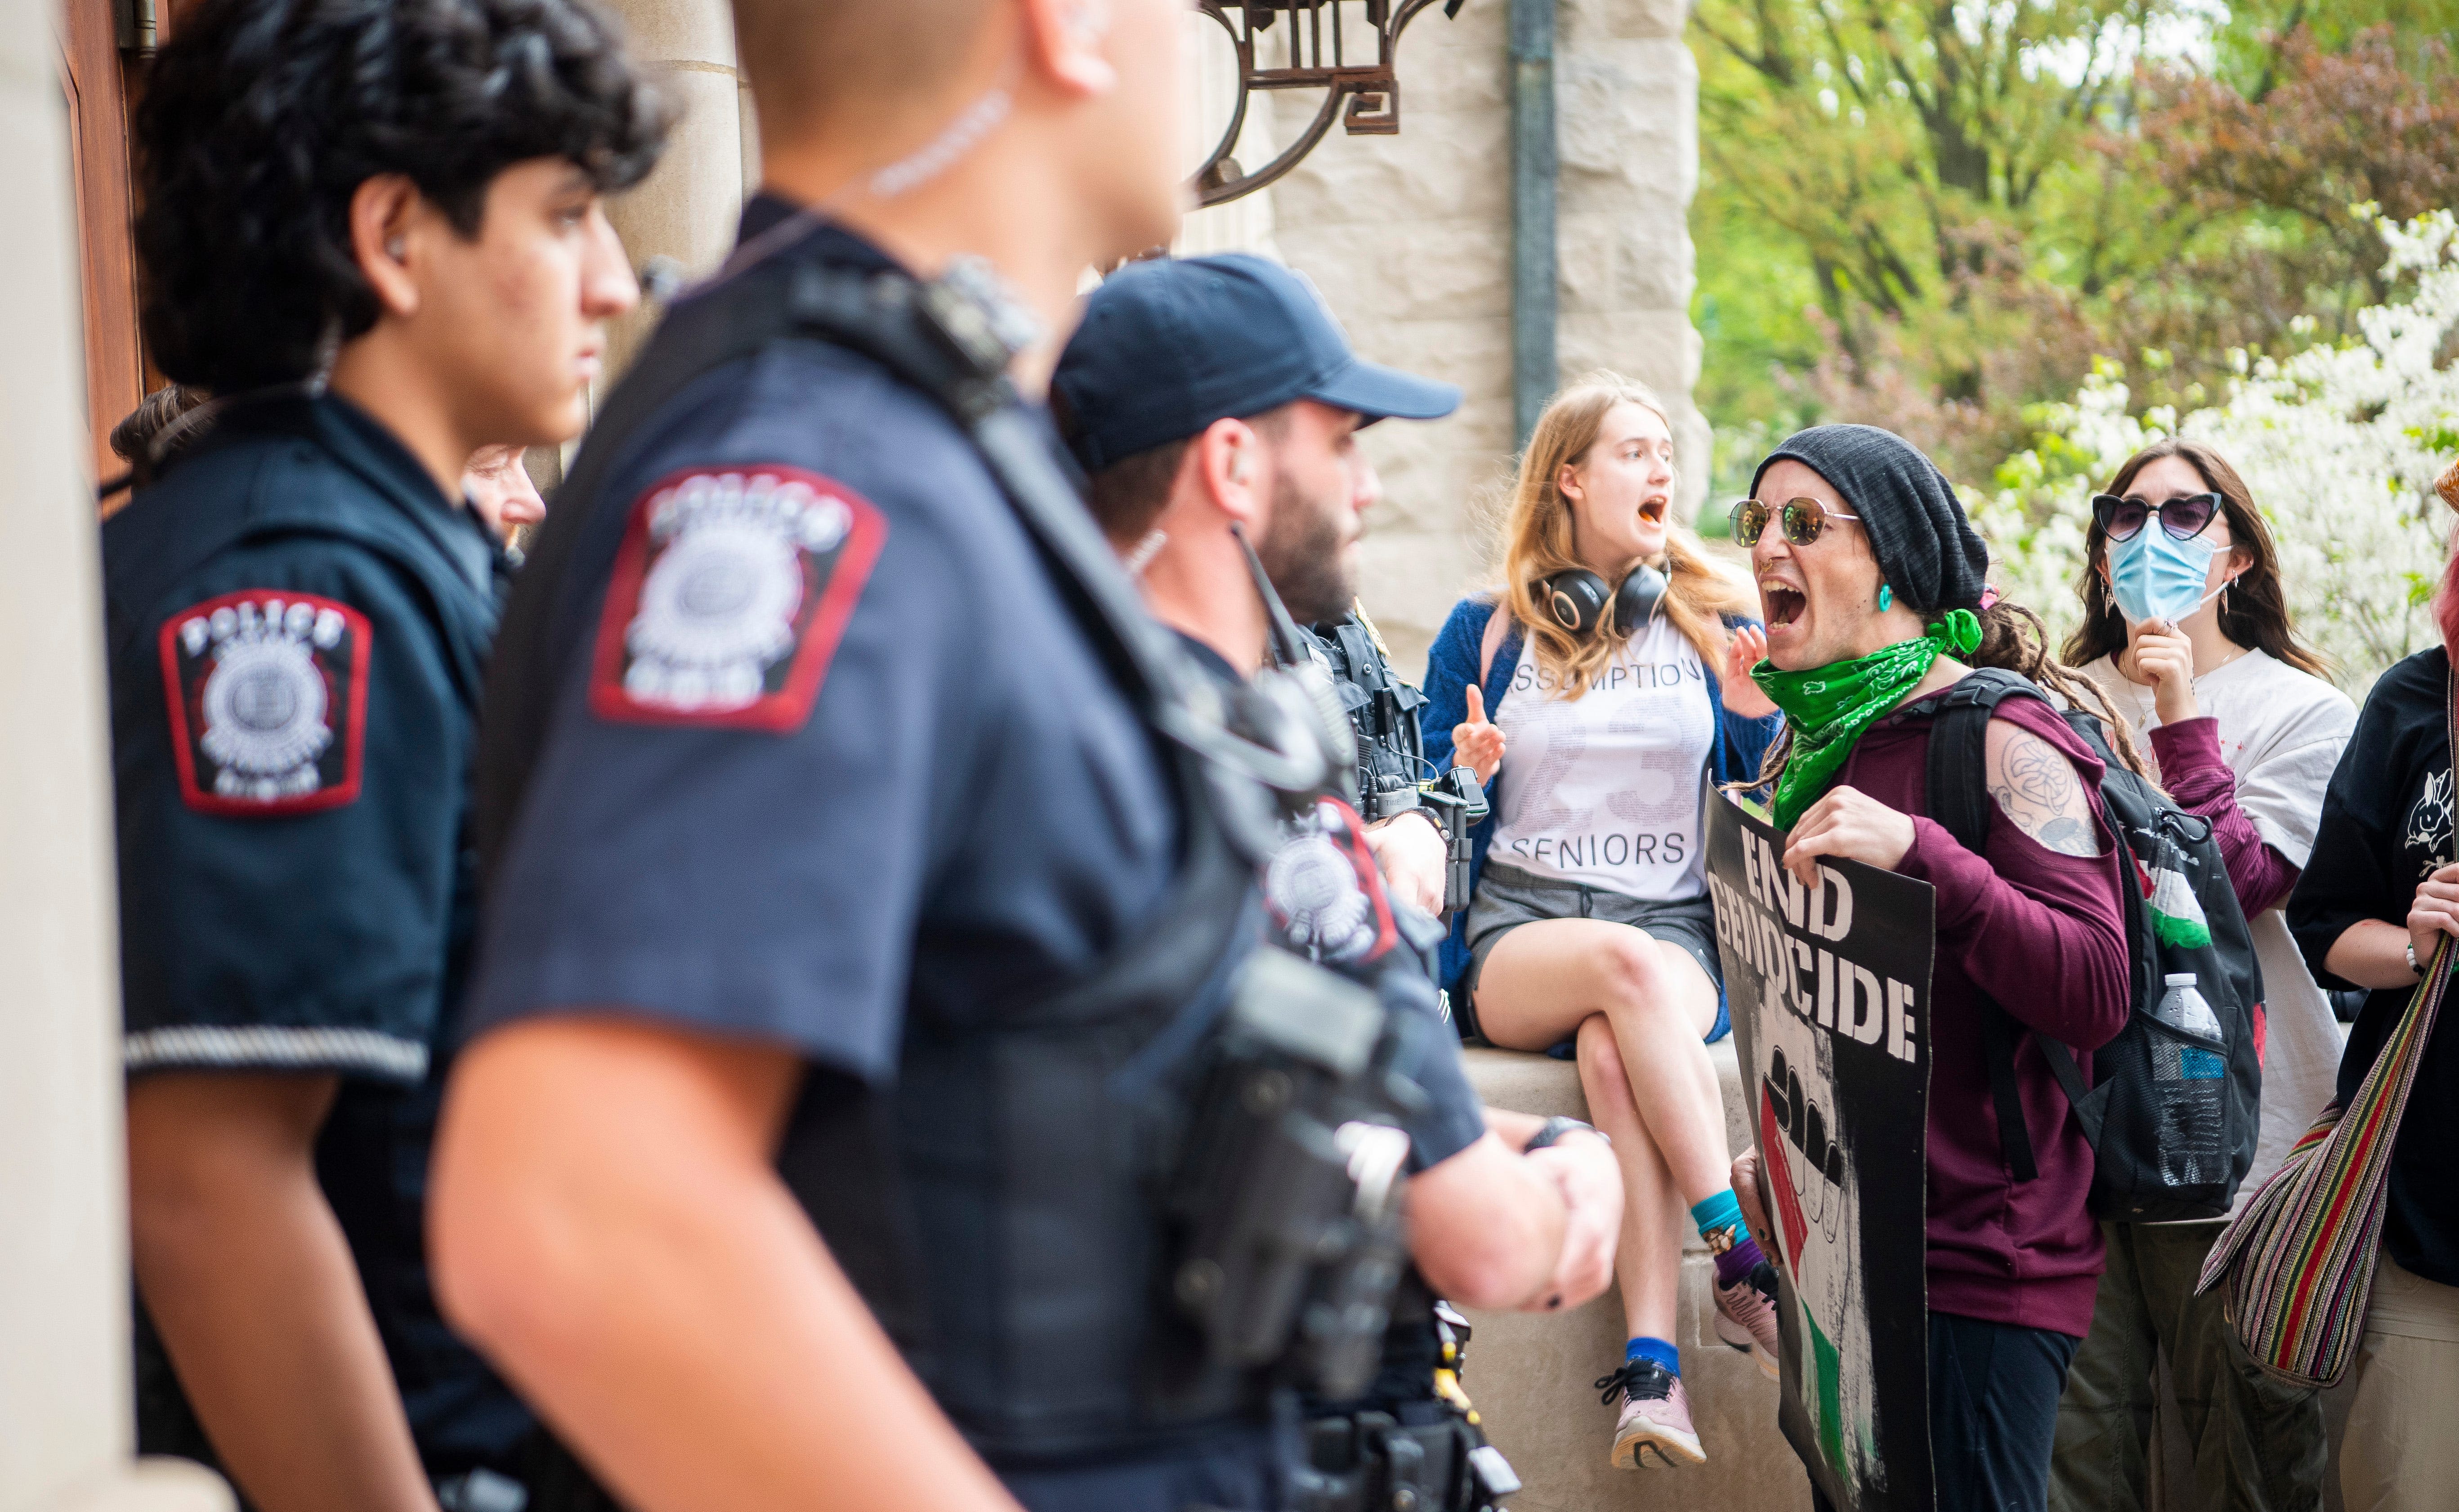 Indiana police continue to make arrests at campuses as students protest Gaza conflict